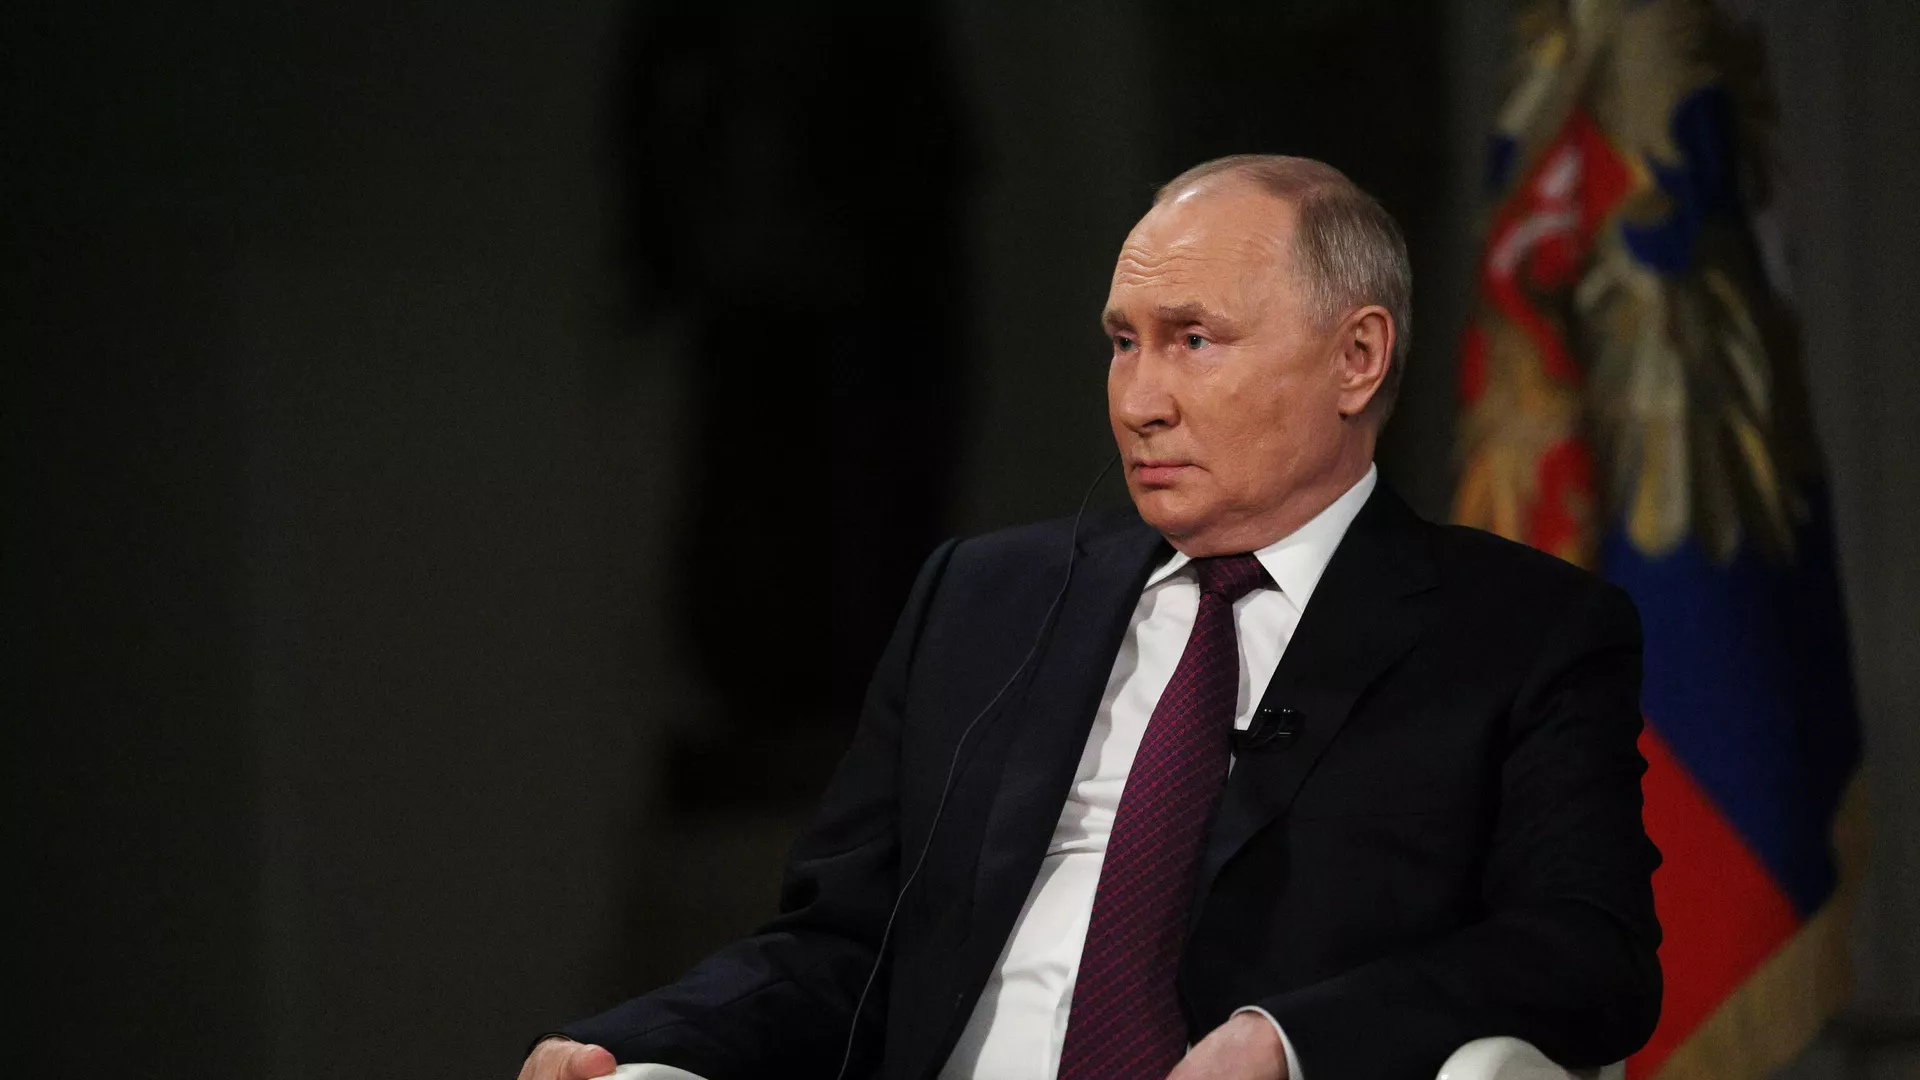 Everything Happening in Ukrainian Direction Matter of Life, Death for Russia - Putin